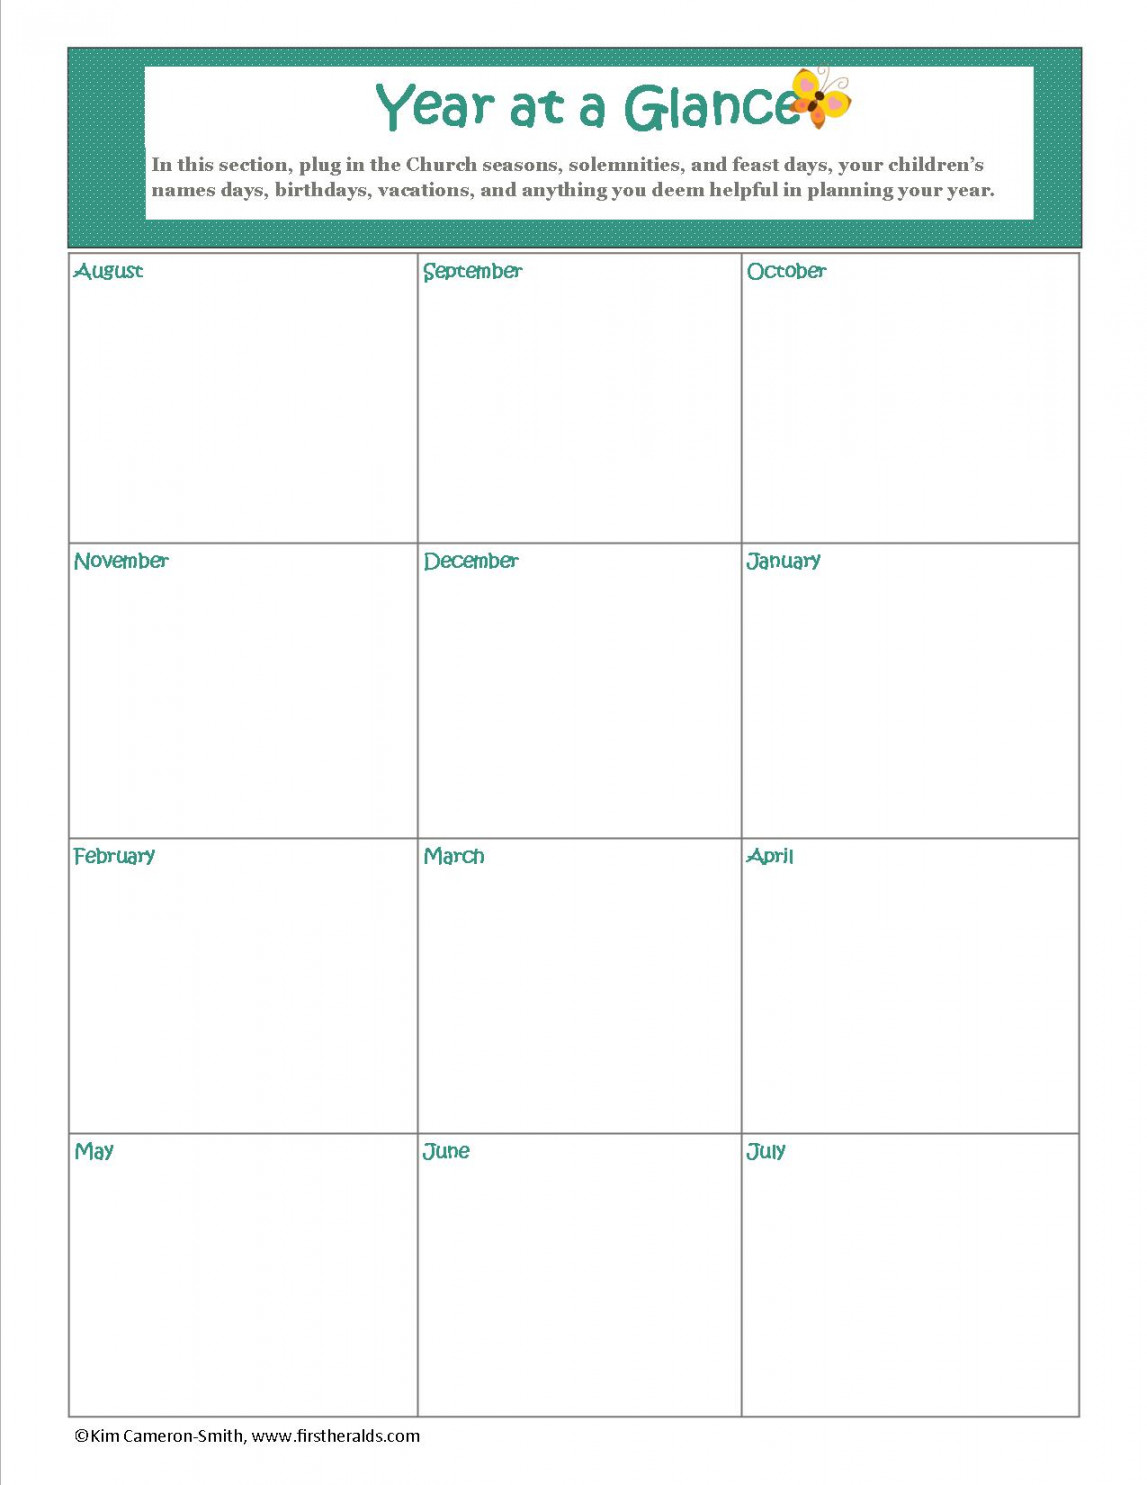 Customized Weekly Planner  FIRST HERALDS